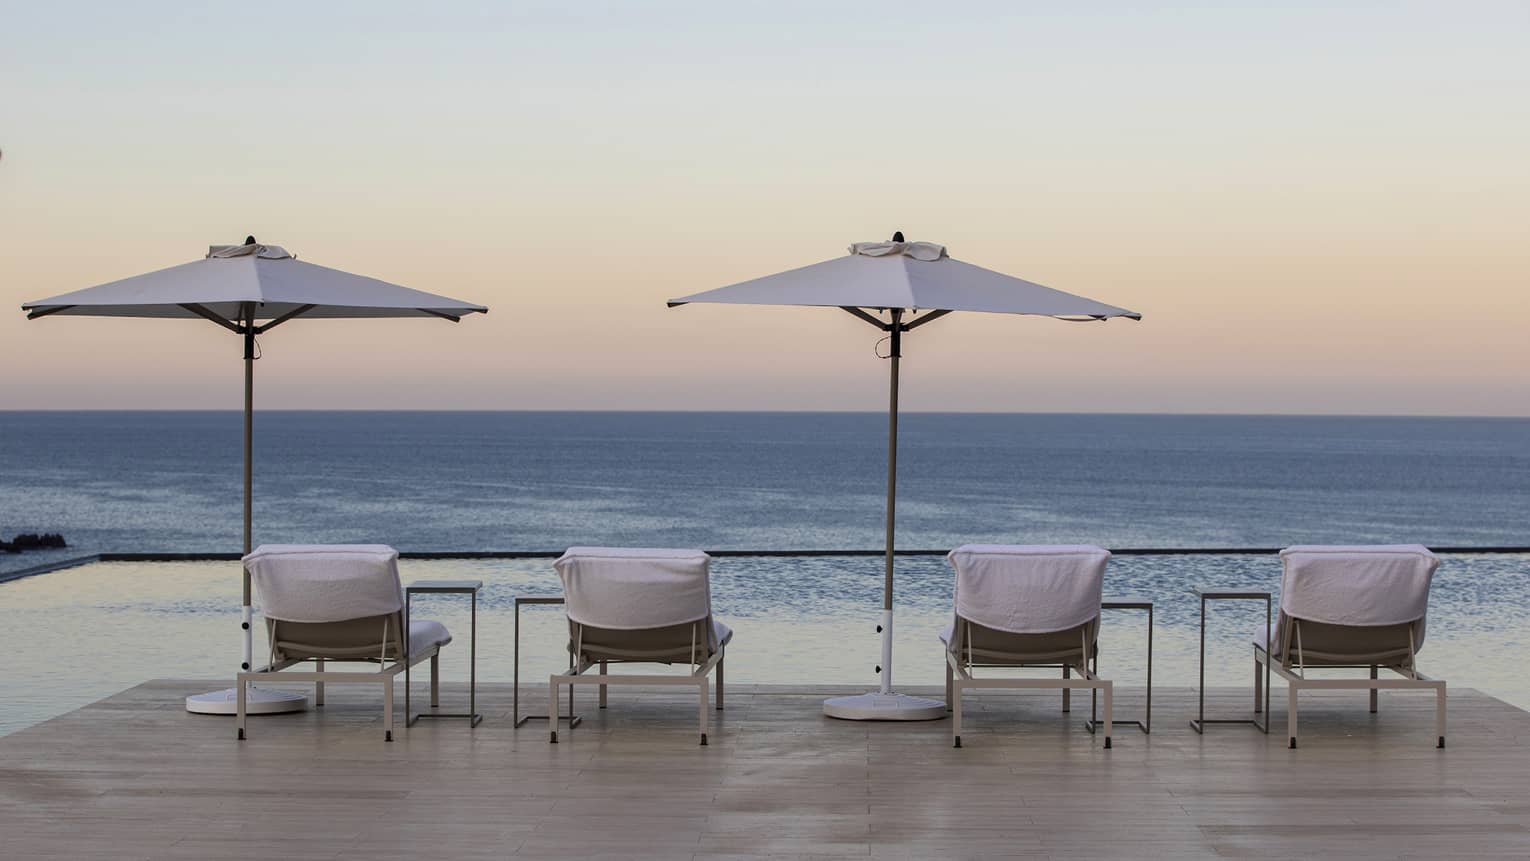 Lounge chairs and umbrellas looking out at the ocean.